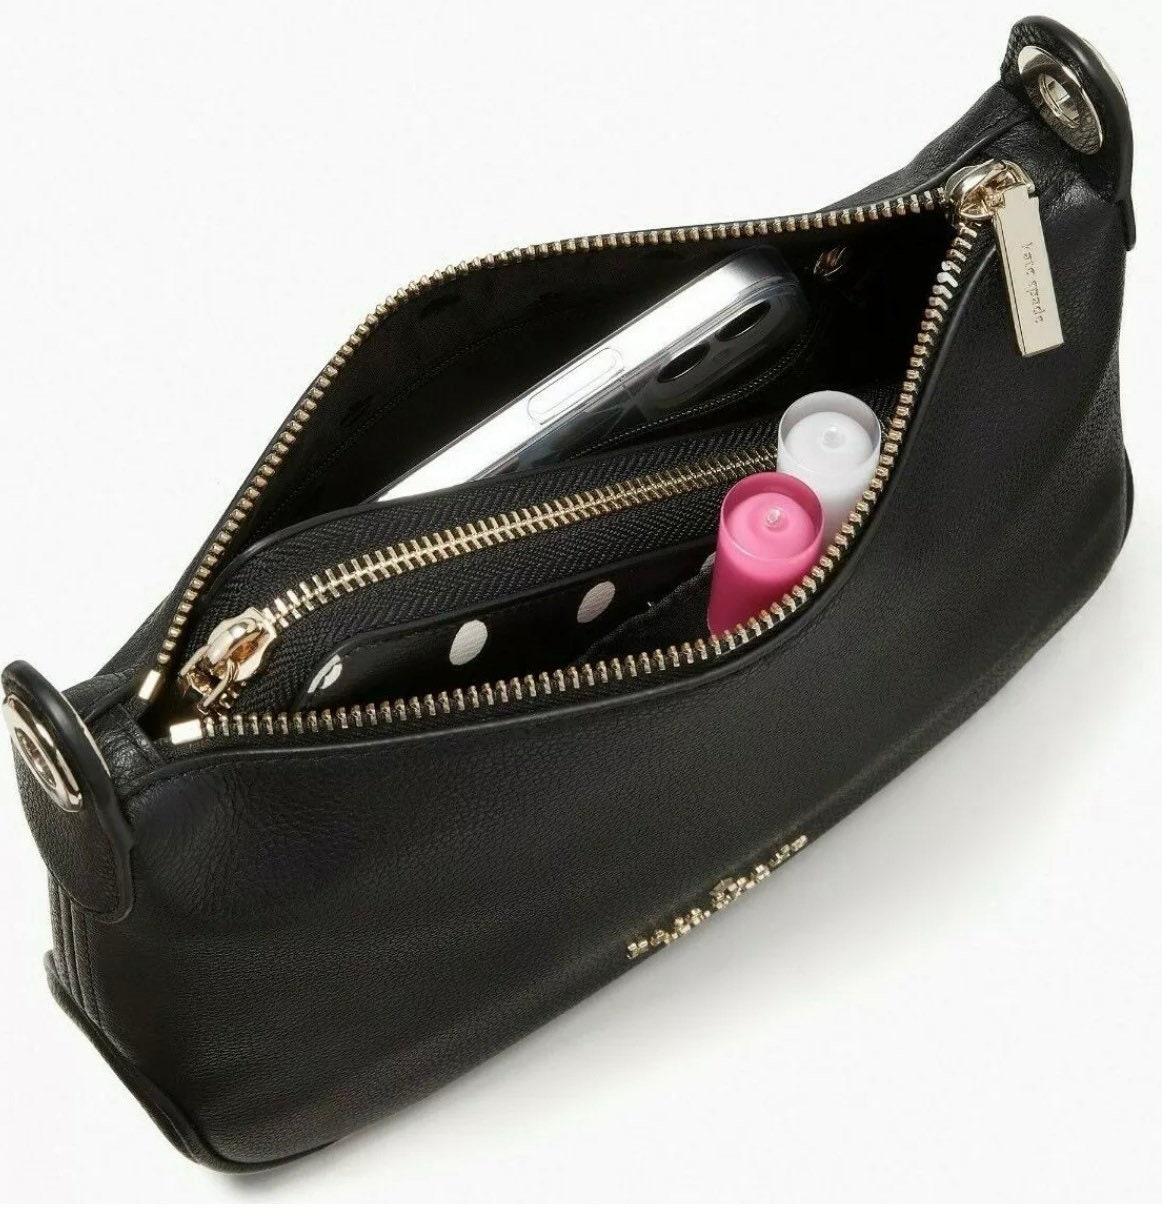 Kate spade rosie crossbody bag w/ zip pouch black pebbled leather